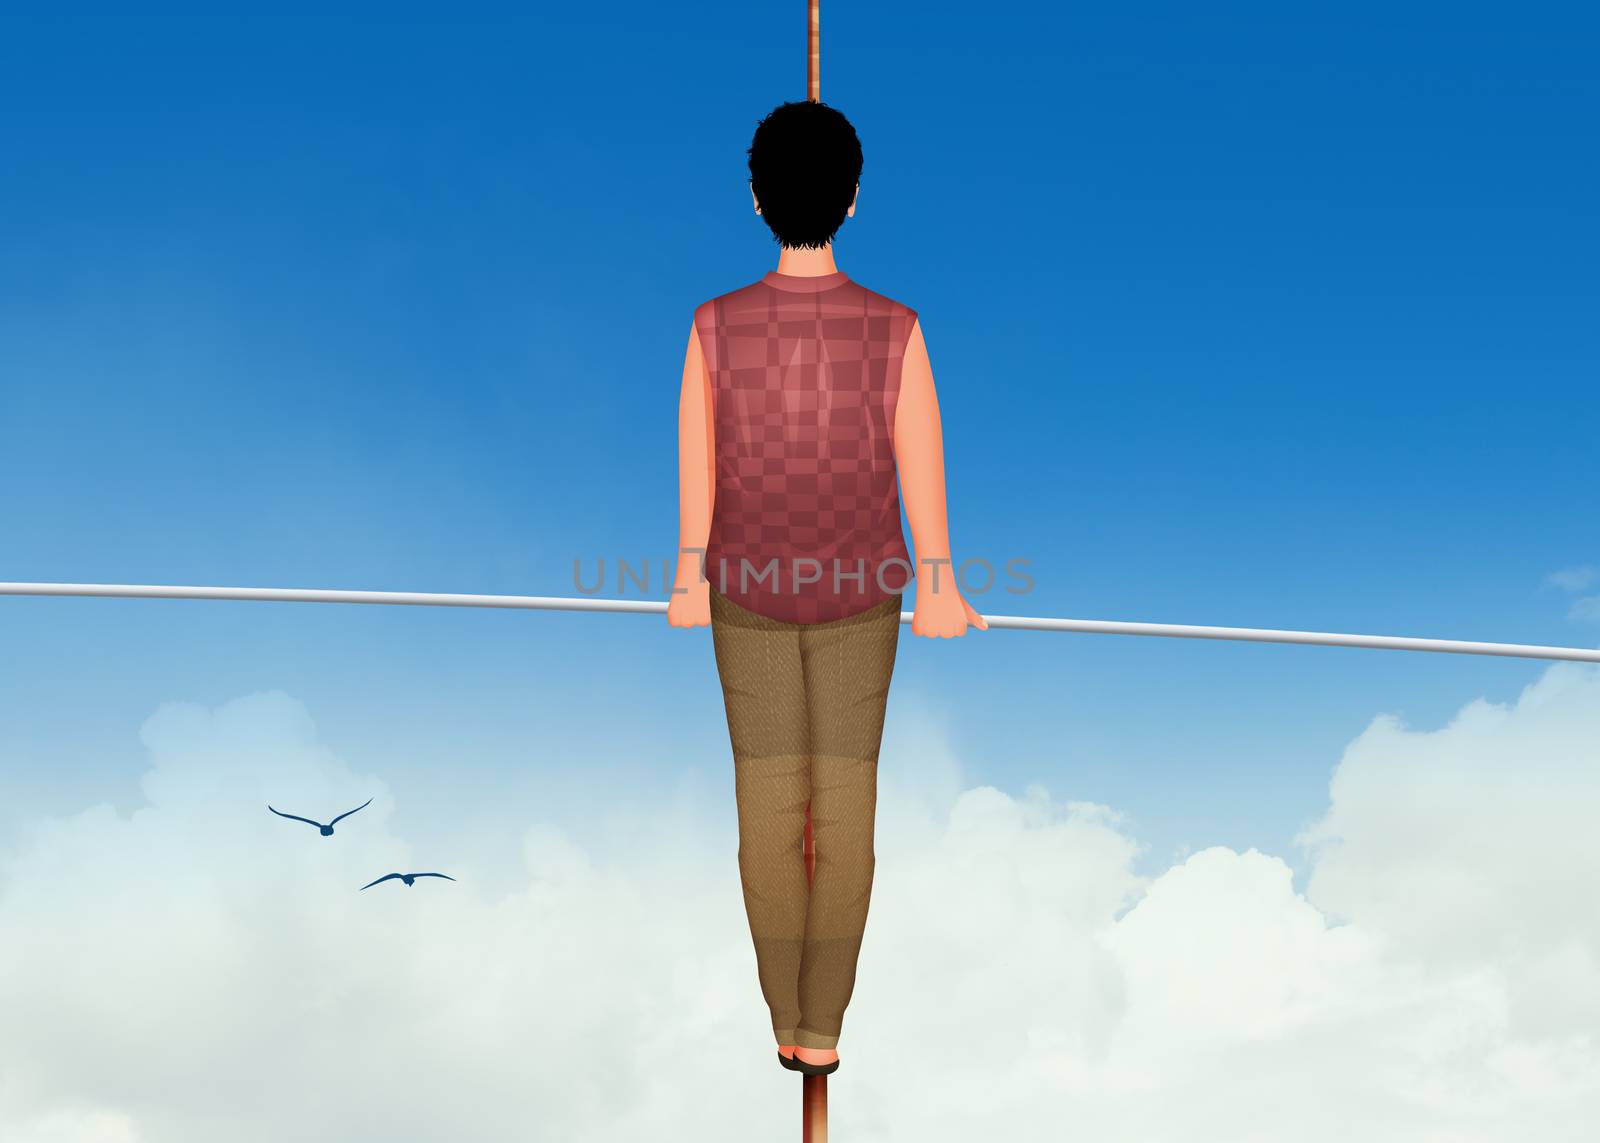 illustration of the tightrope walker on the wire